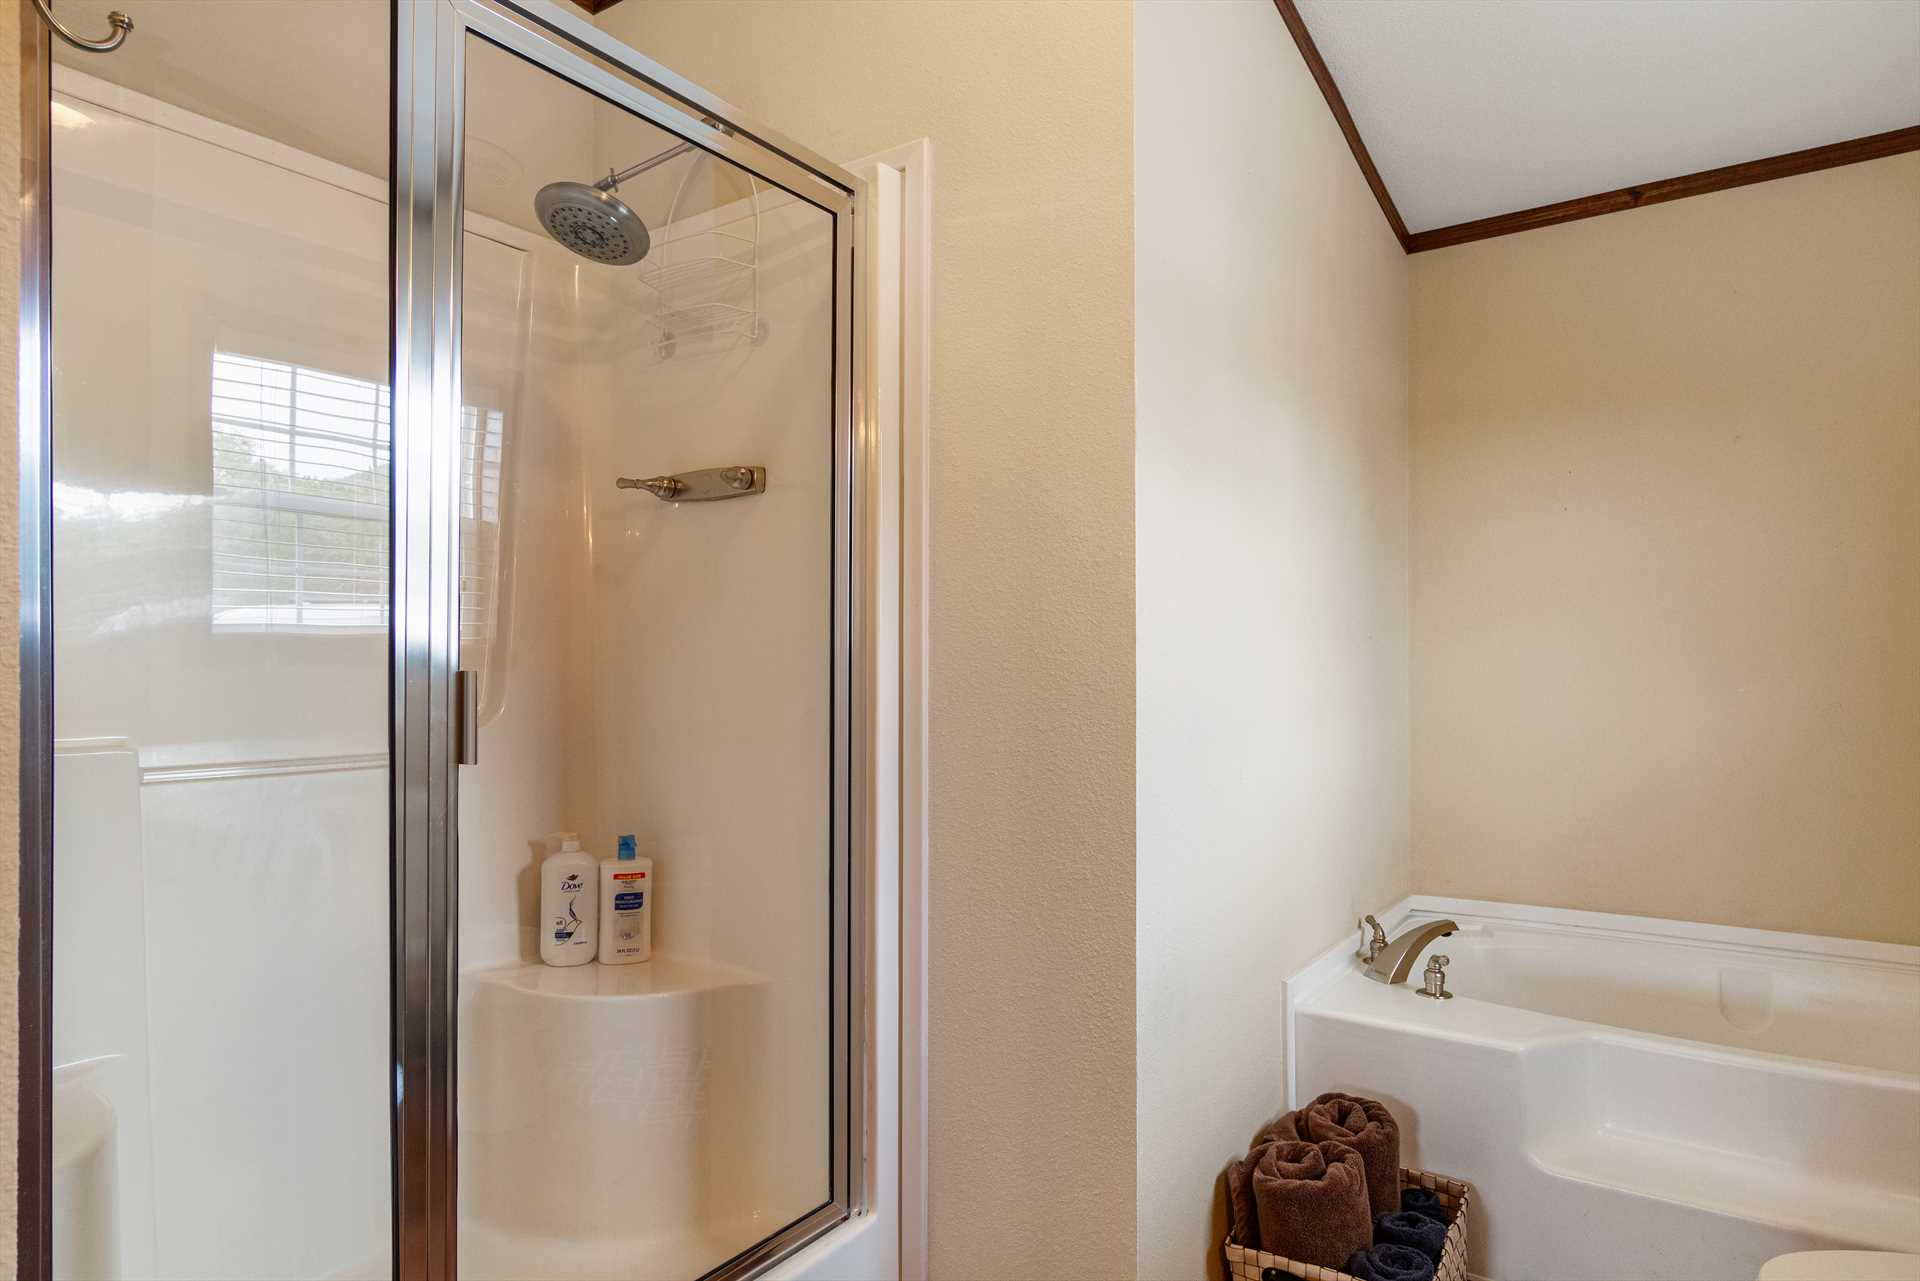                                                 A roomy shower stall and garden-style tub are the centerpieces of the full bath in the master suite!